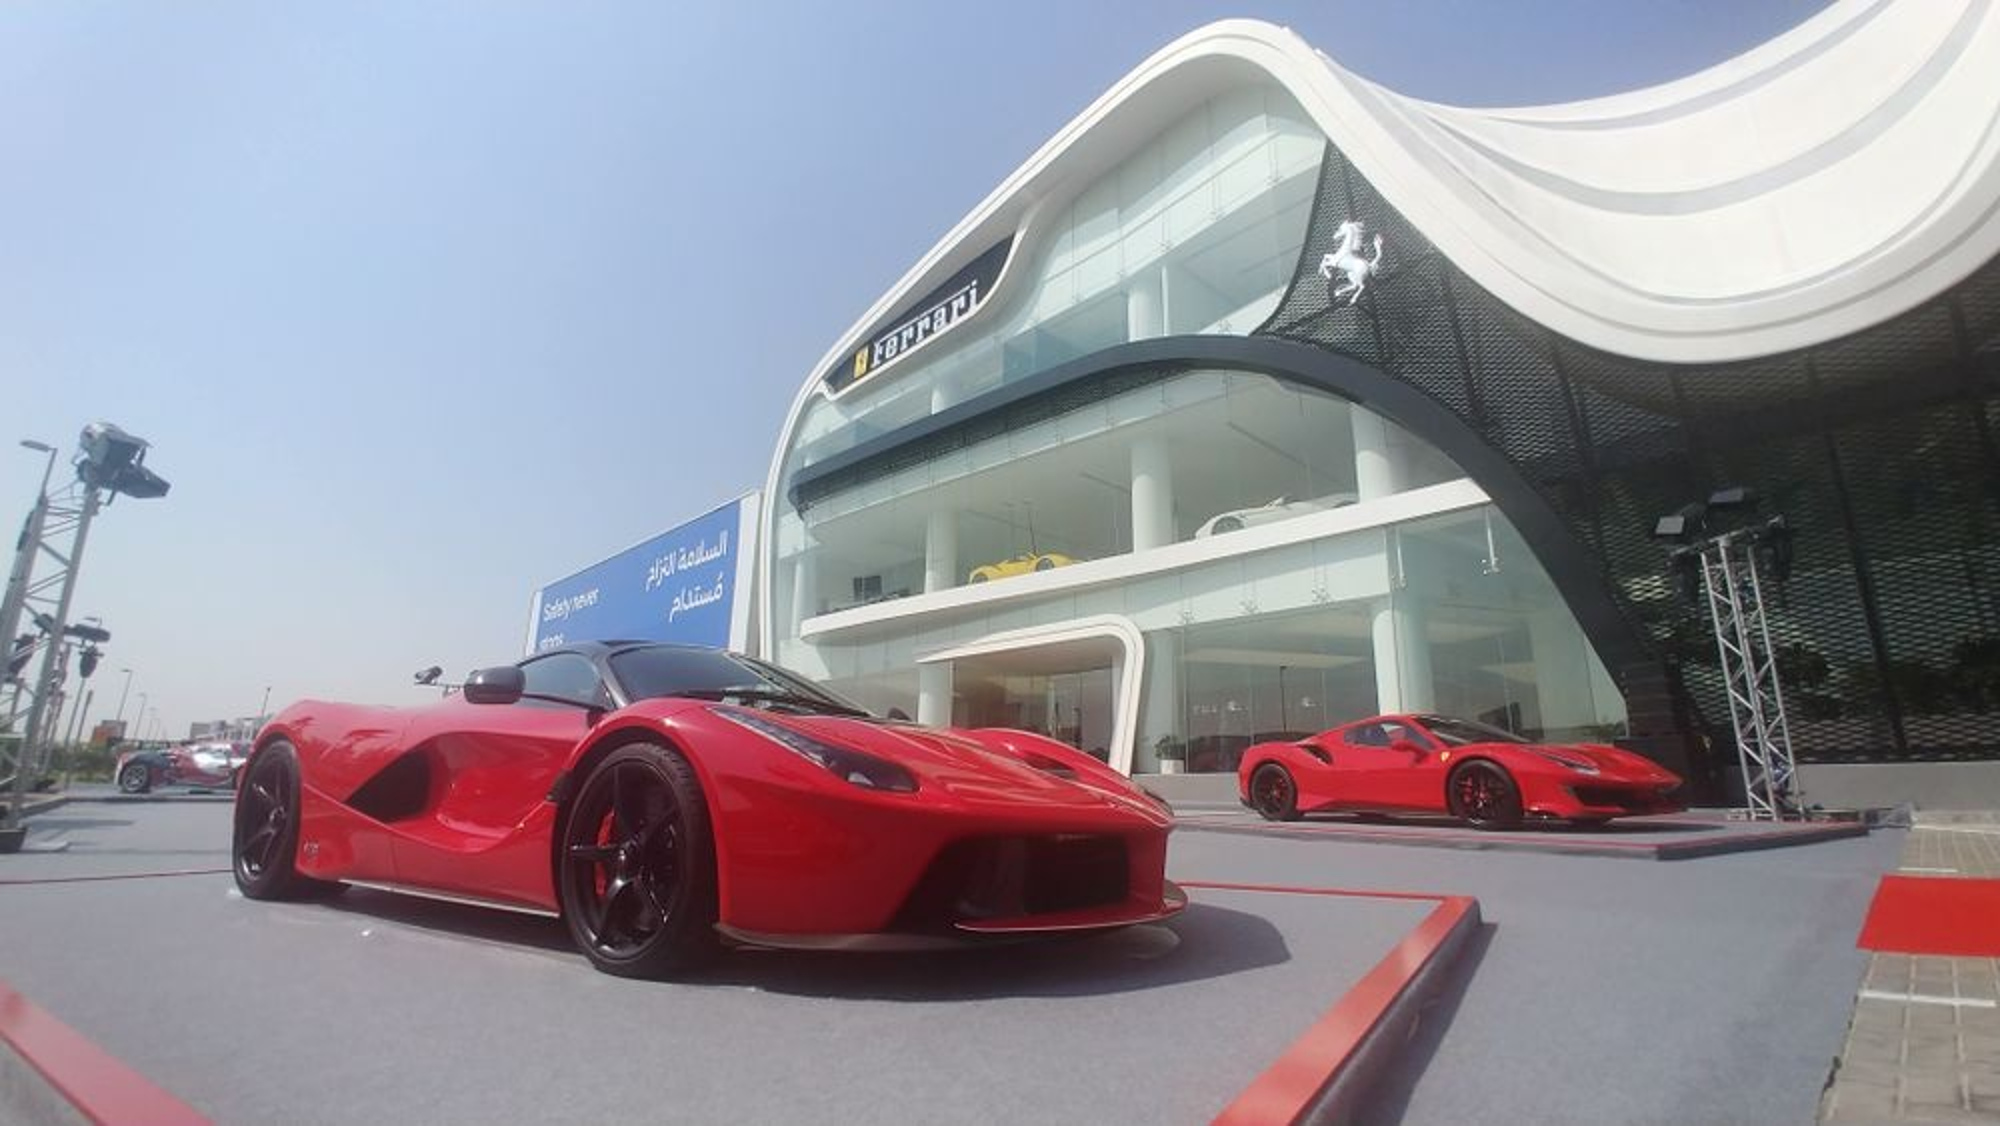 Read more about the article Ferrari Grows 4x In City With 14 Billionaires, Low Tax